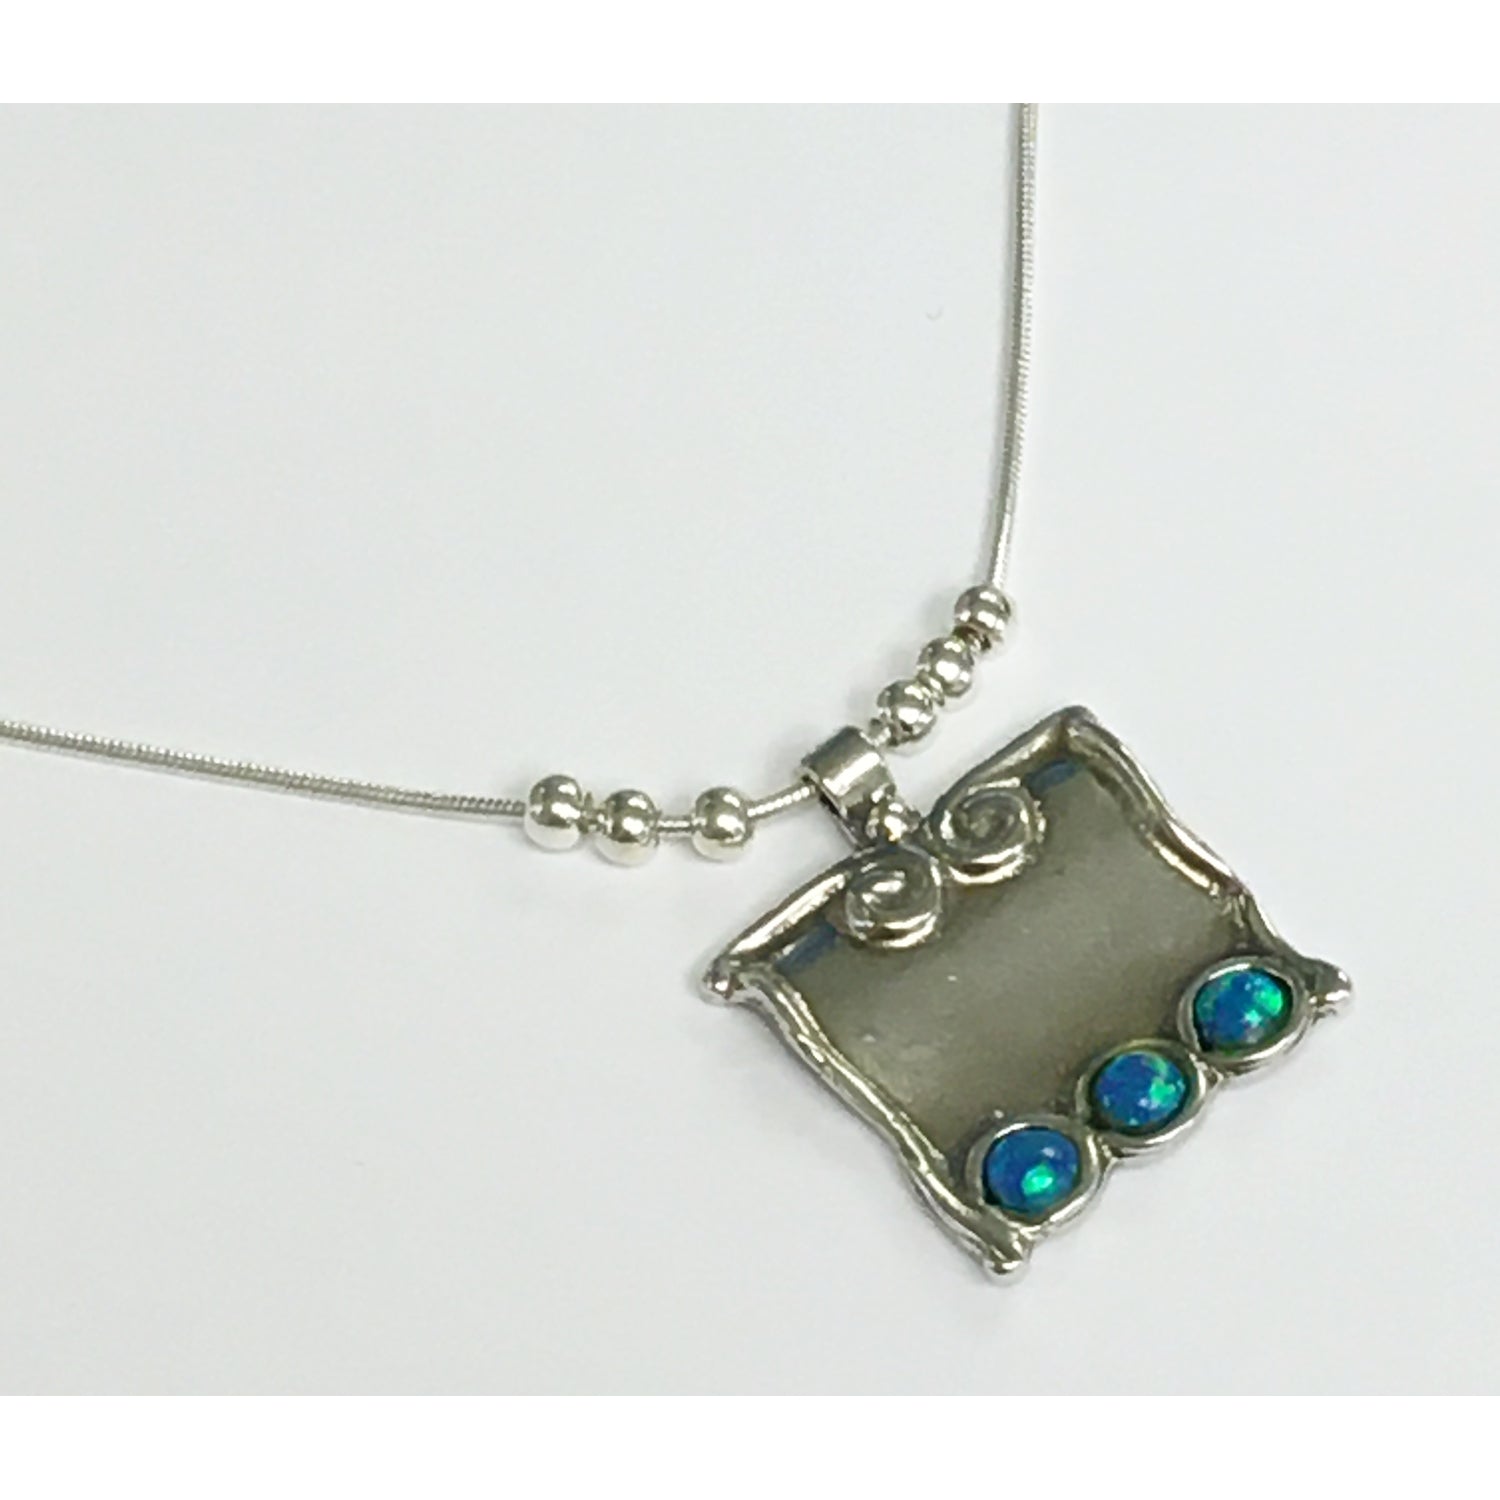 Yair Stern - Blue Square w/3 Beads Necklace